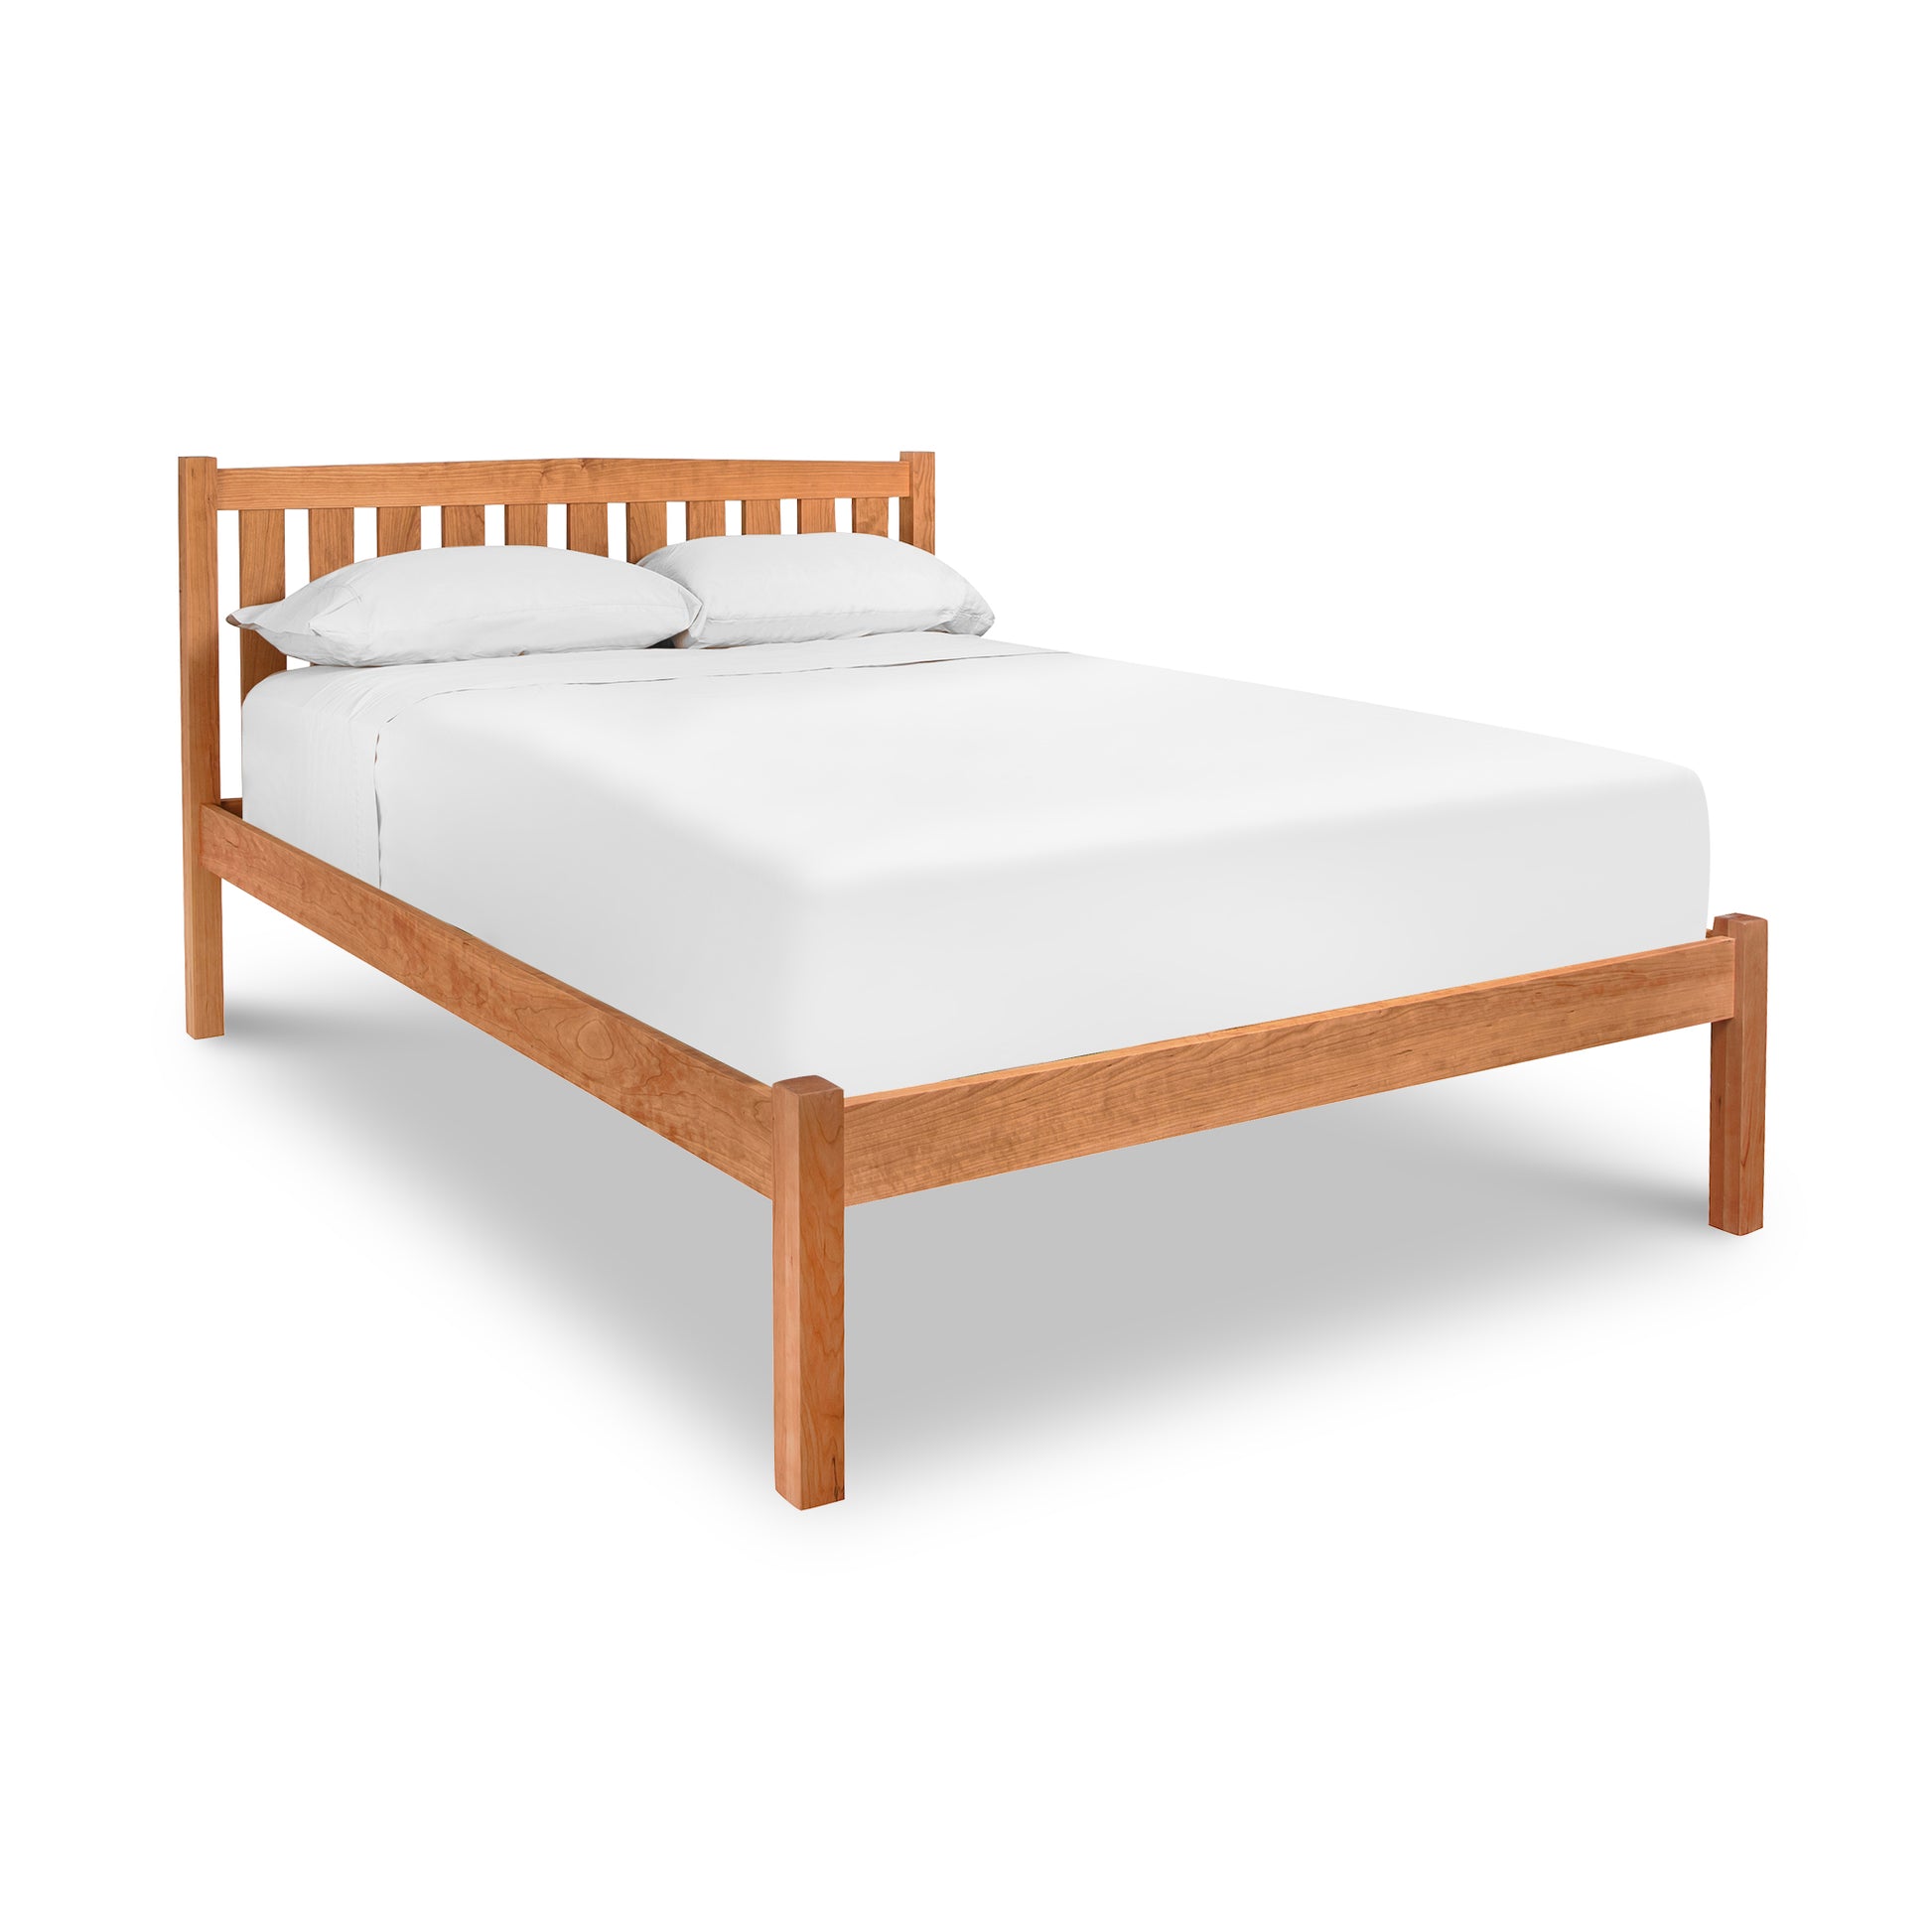 A Bennington Bed with Low Footboard by Vermont Furniture Designs with a white mattress and two white pillows on an isolated white background.